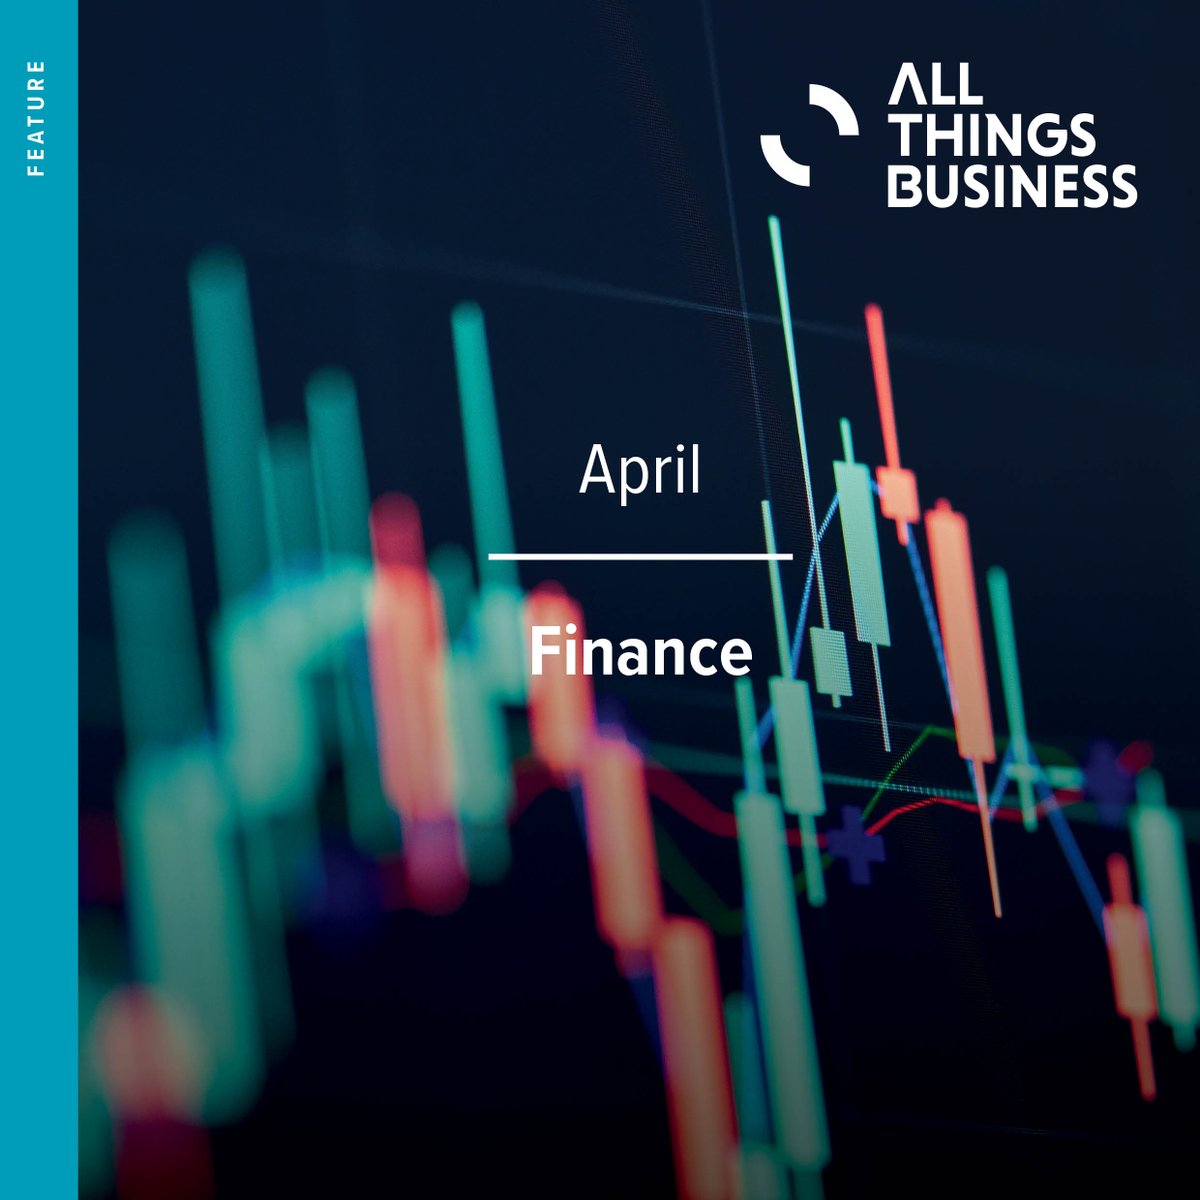 All things finance! Get up-to-date with the latest business news in Northamptonshire, Milton Keynes and Bedfordshire by reading this month's insightful articles from experts within the finance sector and other industries. #Northamptonshire #MiltonKeynes #Bedfordshire